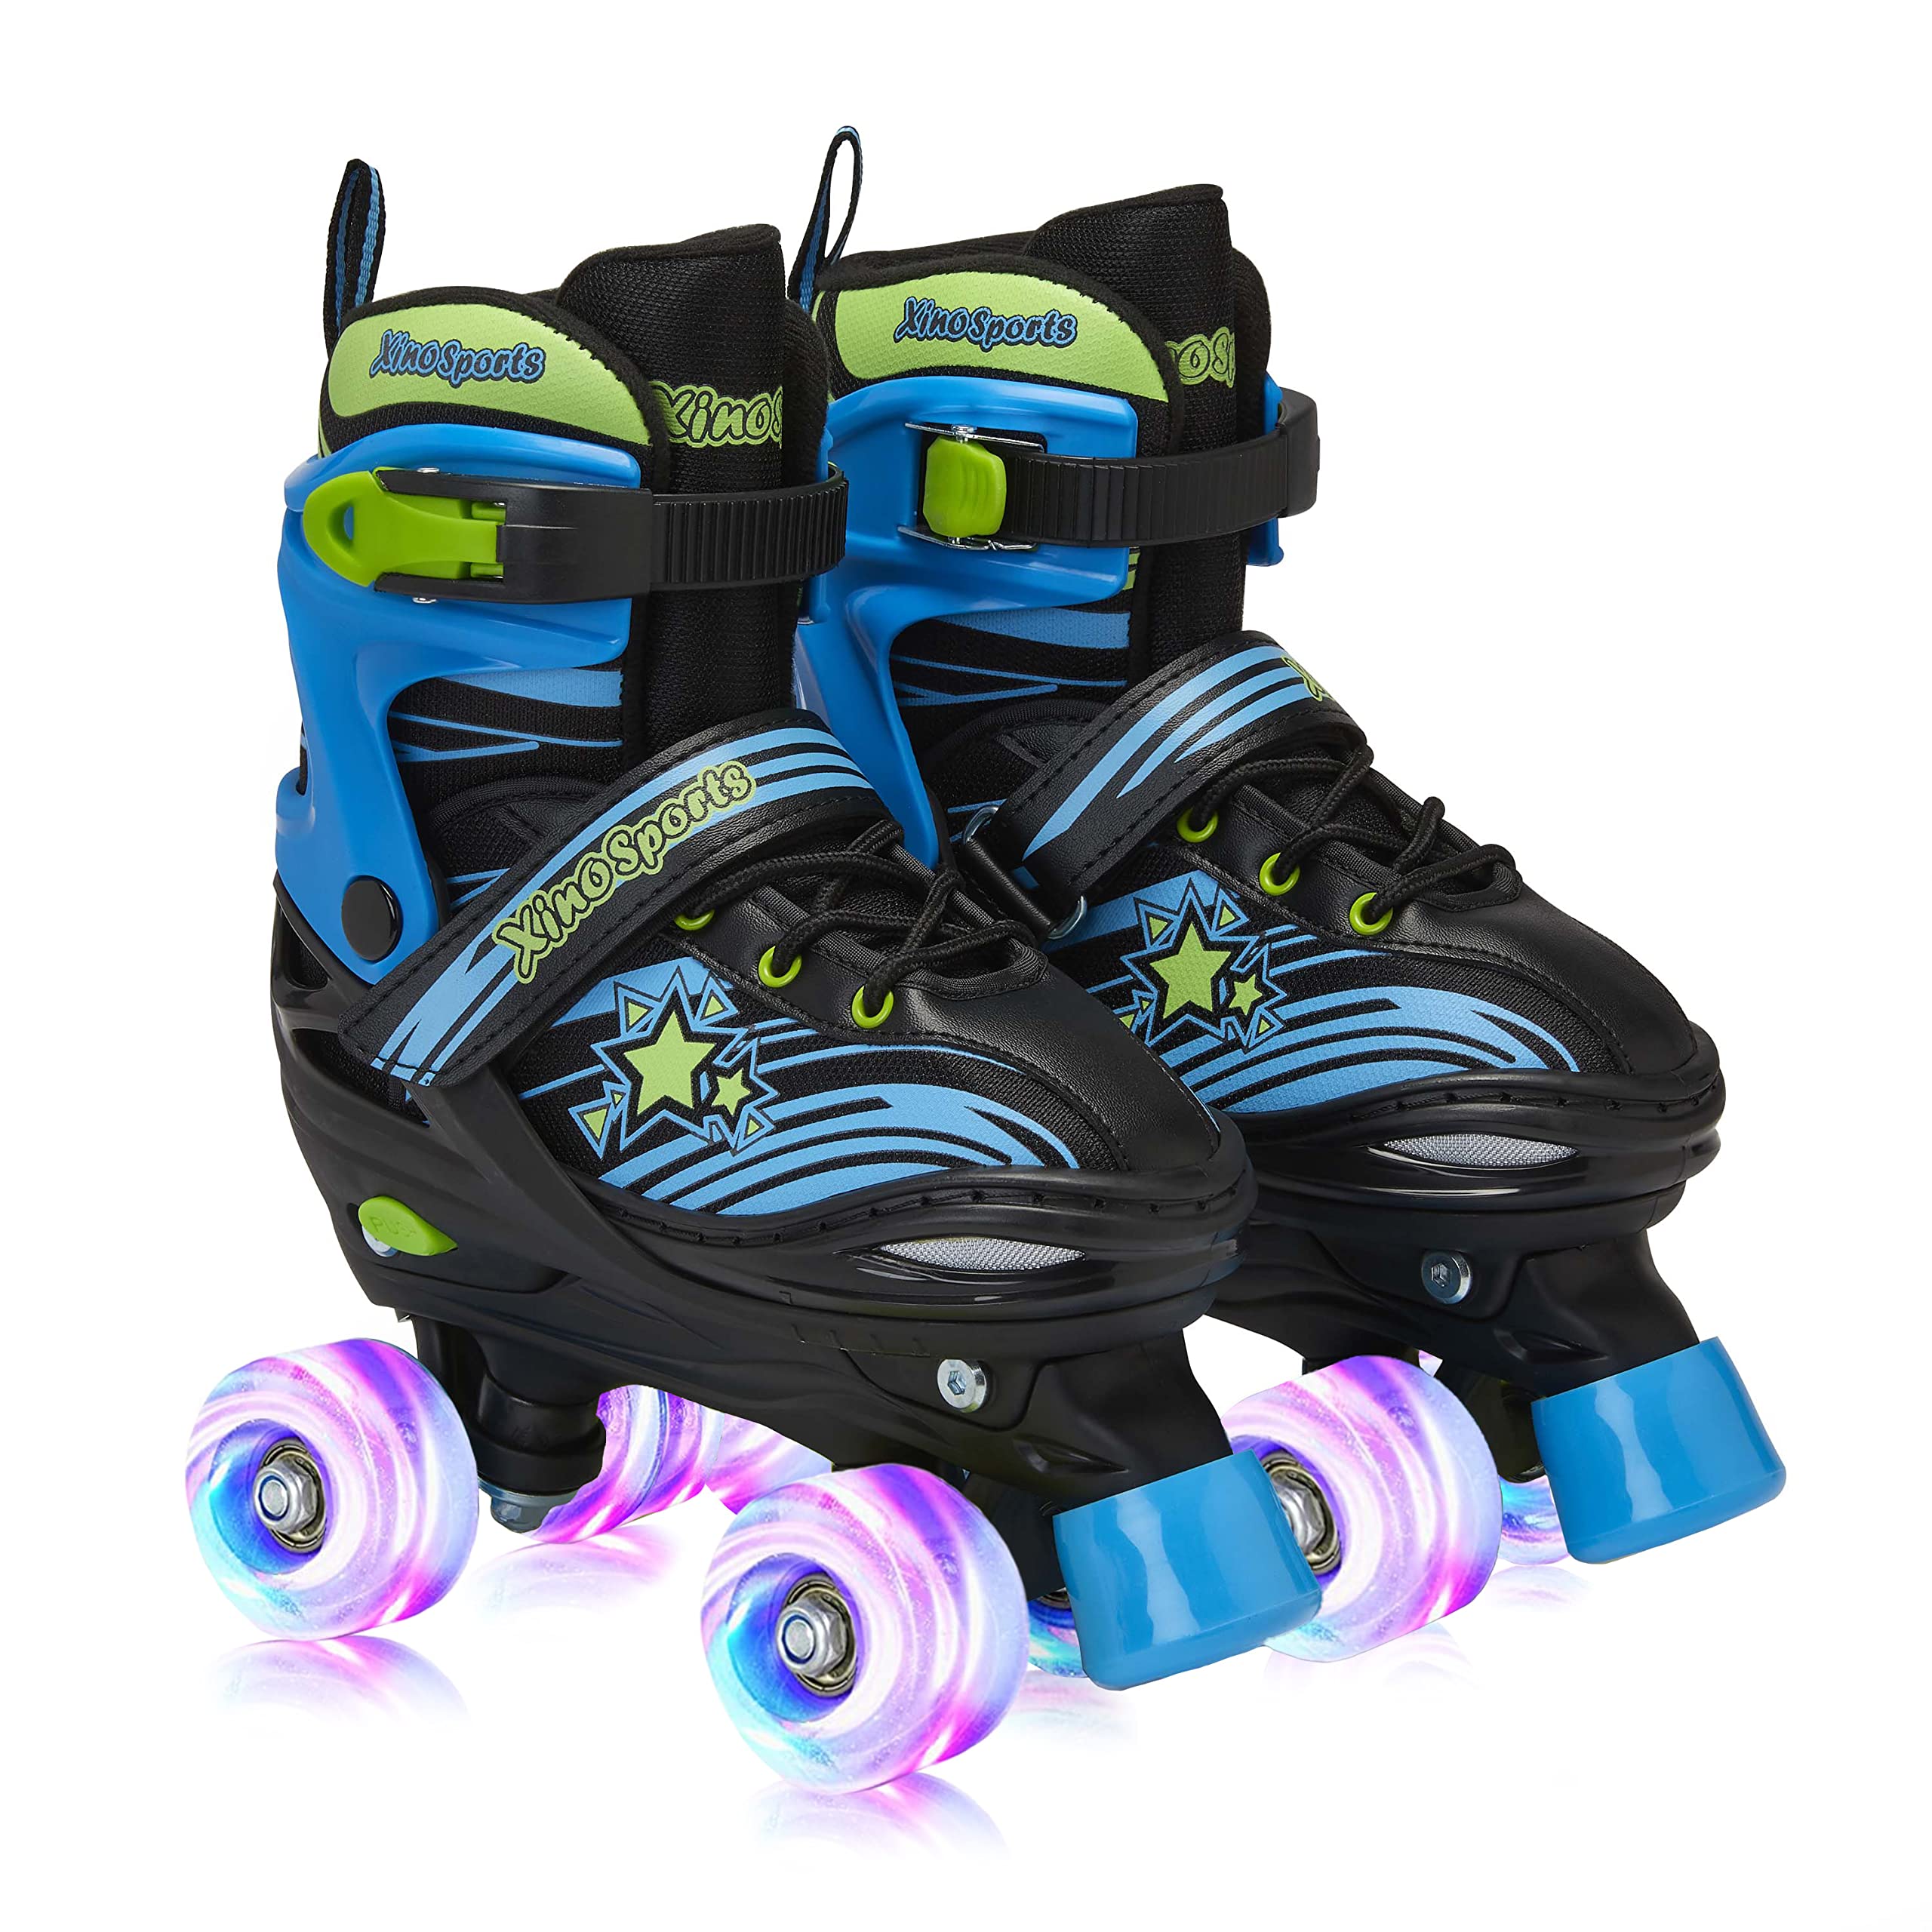 Adjustable Roller Skates for Boys and Girls With Illuminating Wheels - Xino Sports - Xino Sports